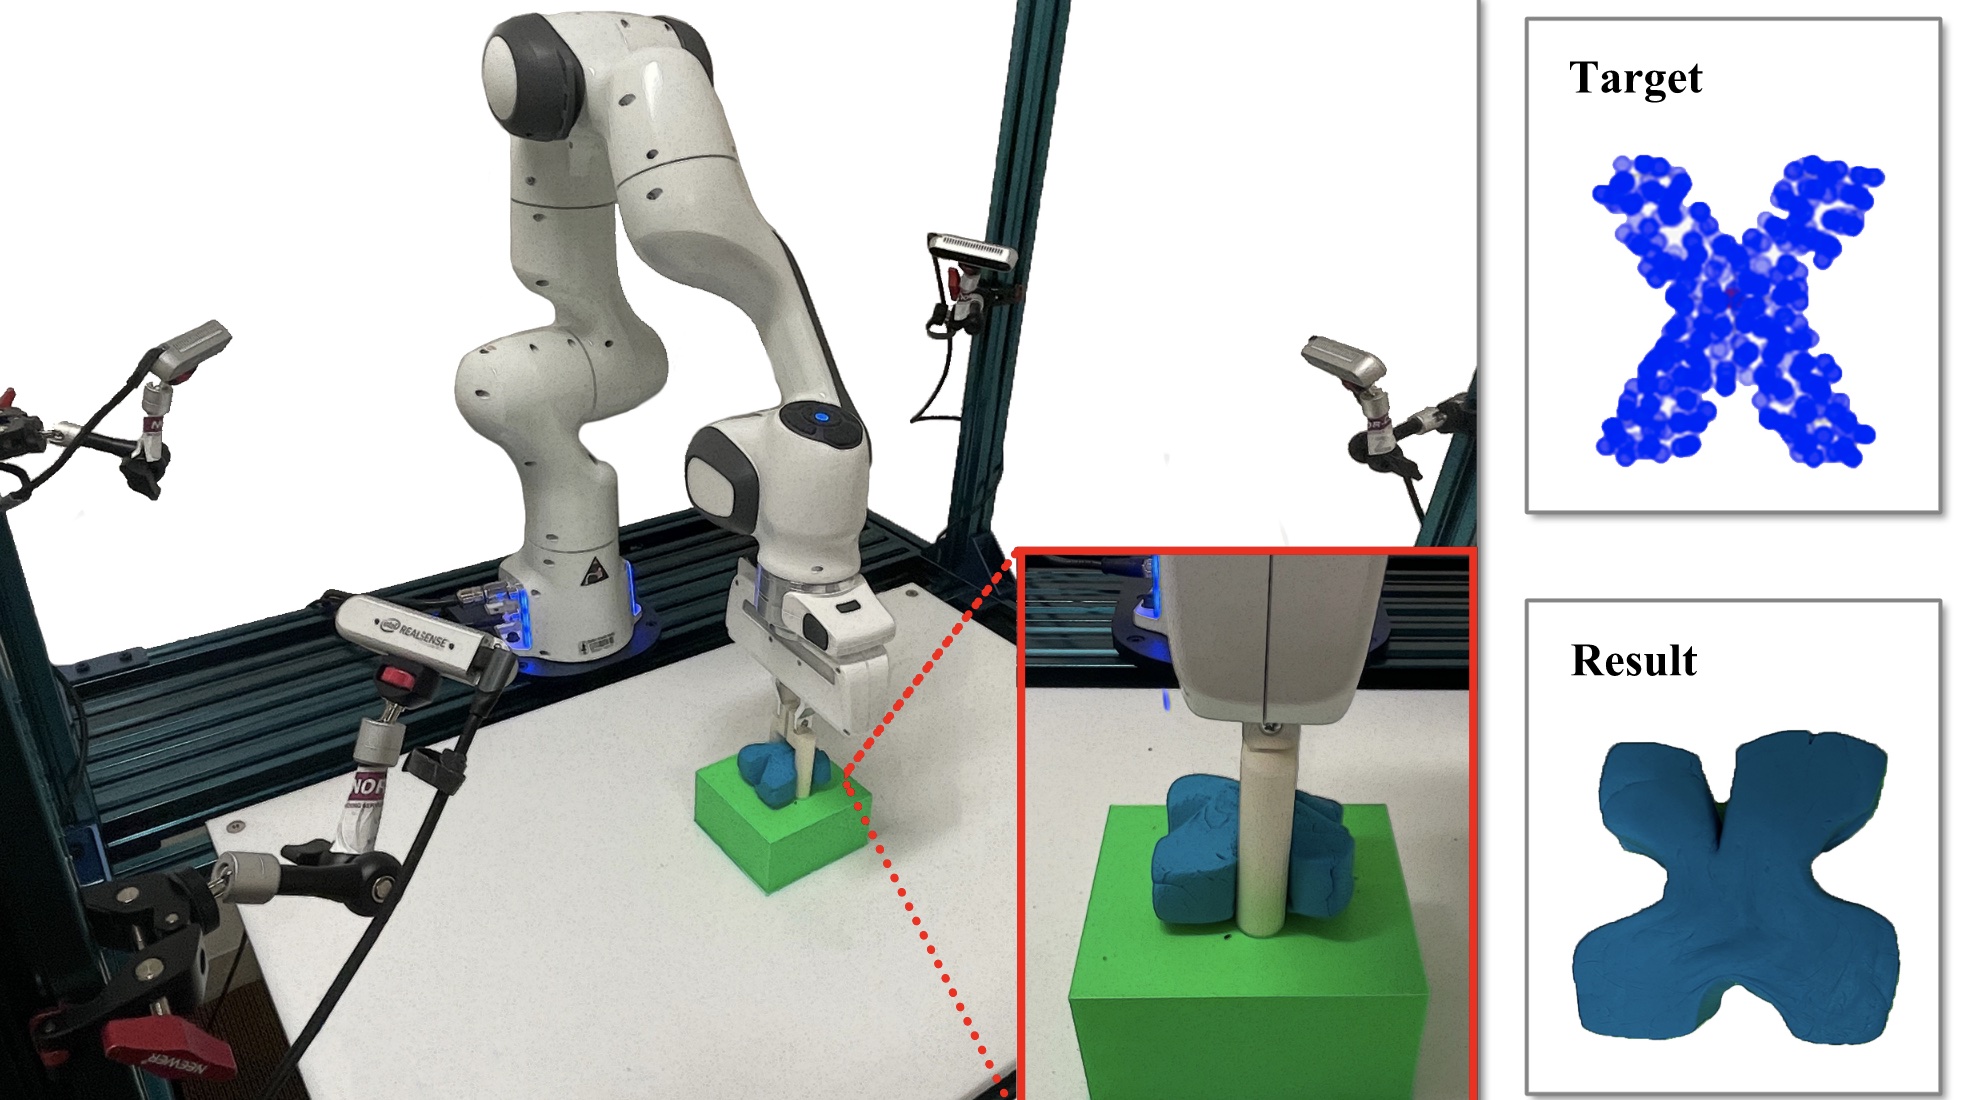 Robots play with play dough | MIT News | Massachusetts Institute of  Technology